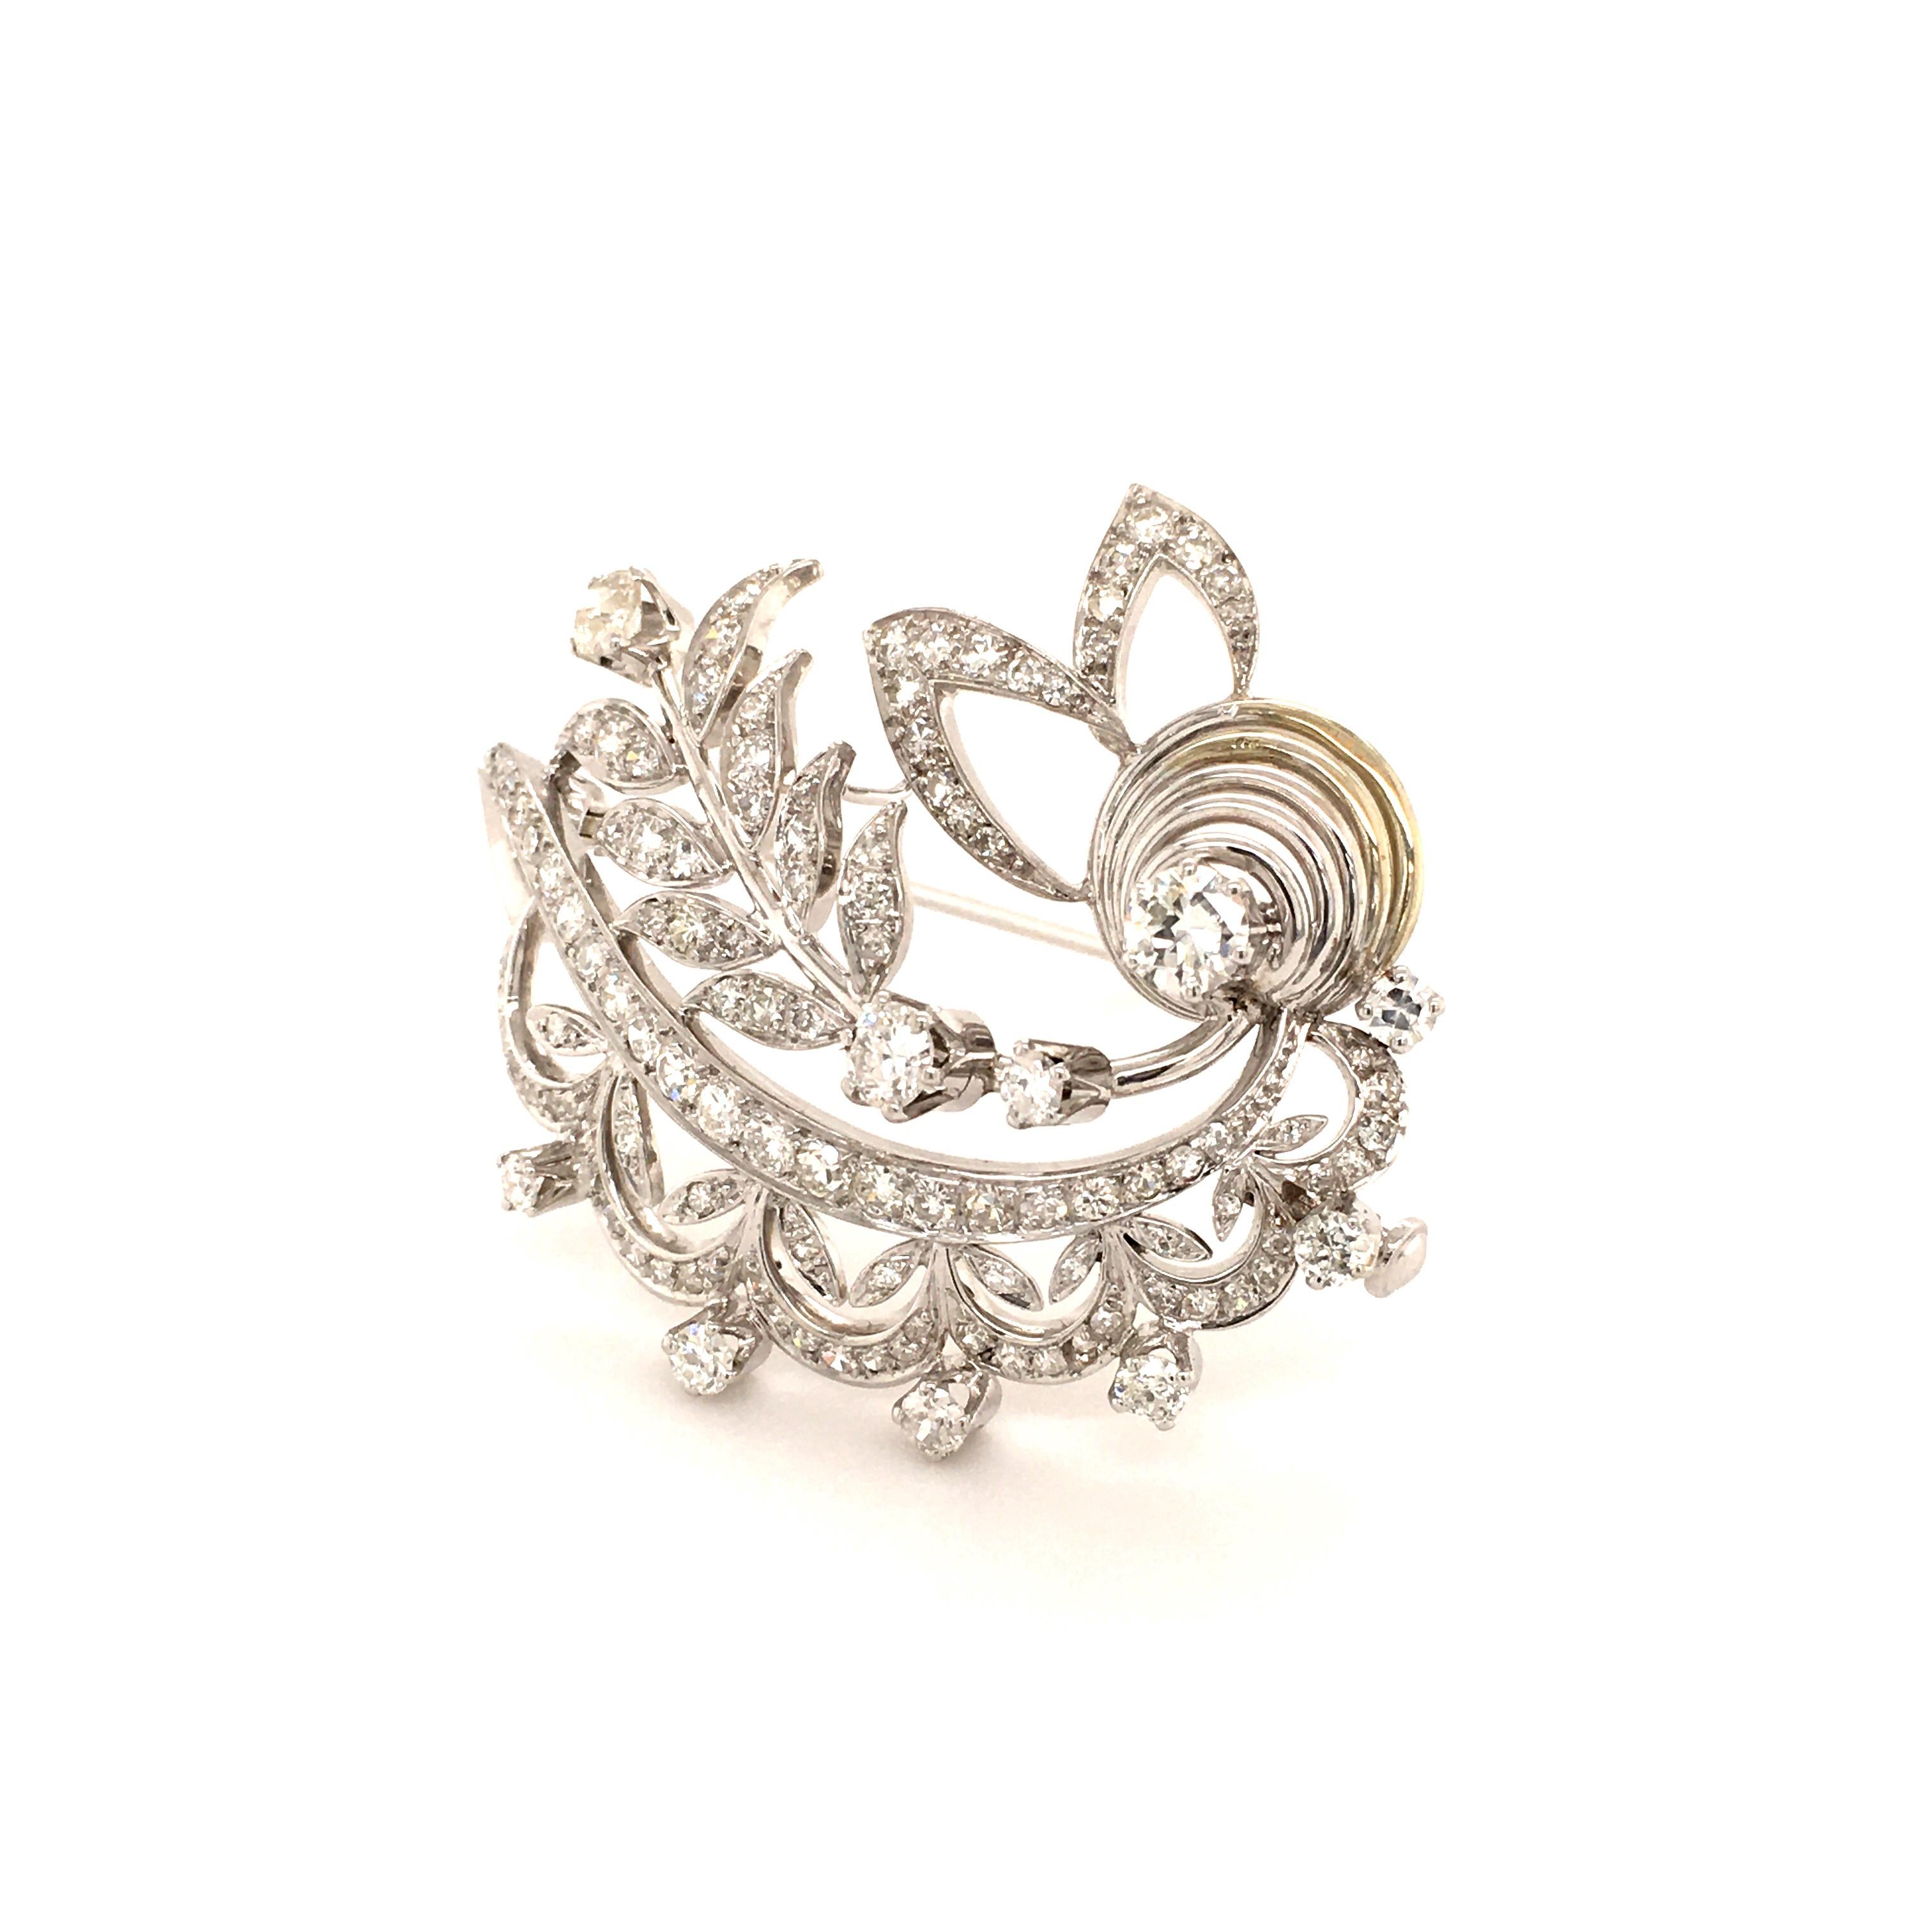 This beautifully handcrafted floral brooch in 18 karat white gold is set with 10 old cut diamonds of G/H color and vs/si clarity. The smaller 108 diamonds are either single cuts or old cuts of G/H color and vs/si clarity, total weight approximately